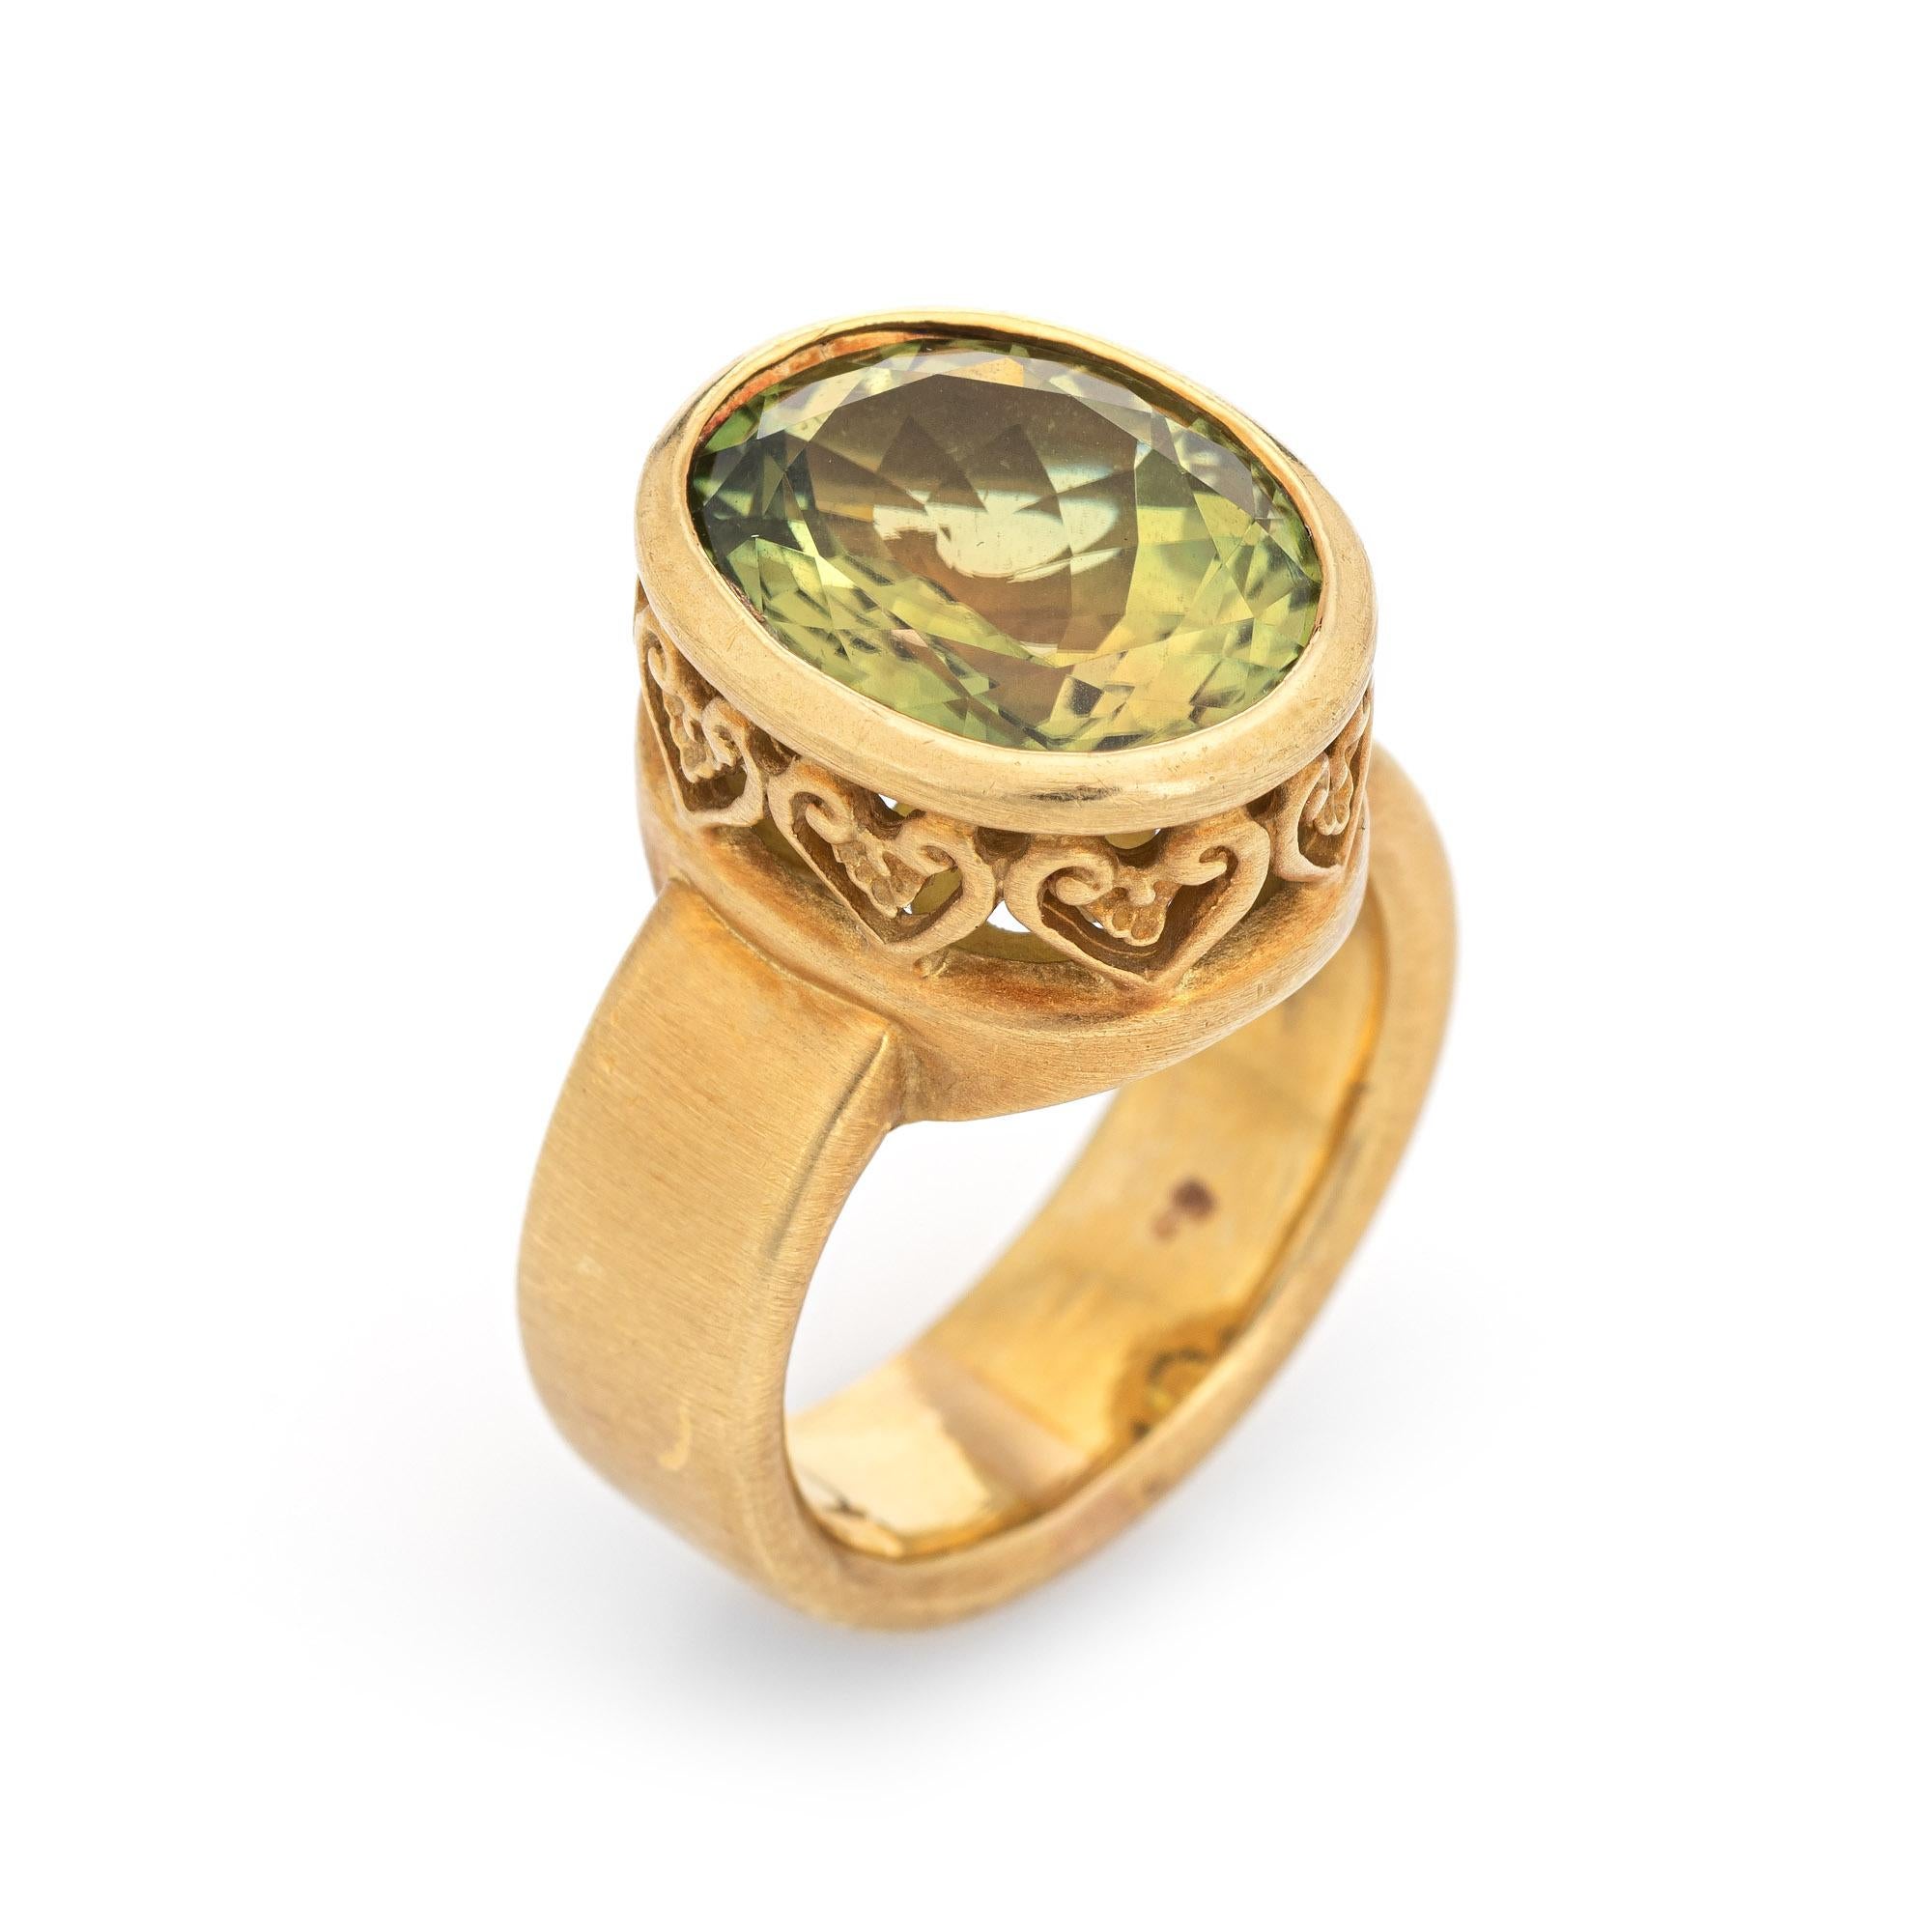 Stylish estate olive green tourmaline cocktail ring crafted in 18 karat yellow gold. 

Mixed cut tourmaline measures 15.2 x 12.2 x 7.0mm (estimated at 8.70 carats). The tourmaline is in excellent condition and free of cracks or chips. 

The olive